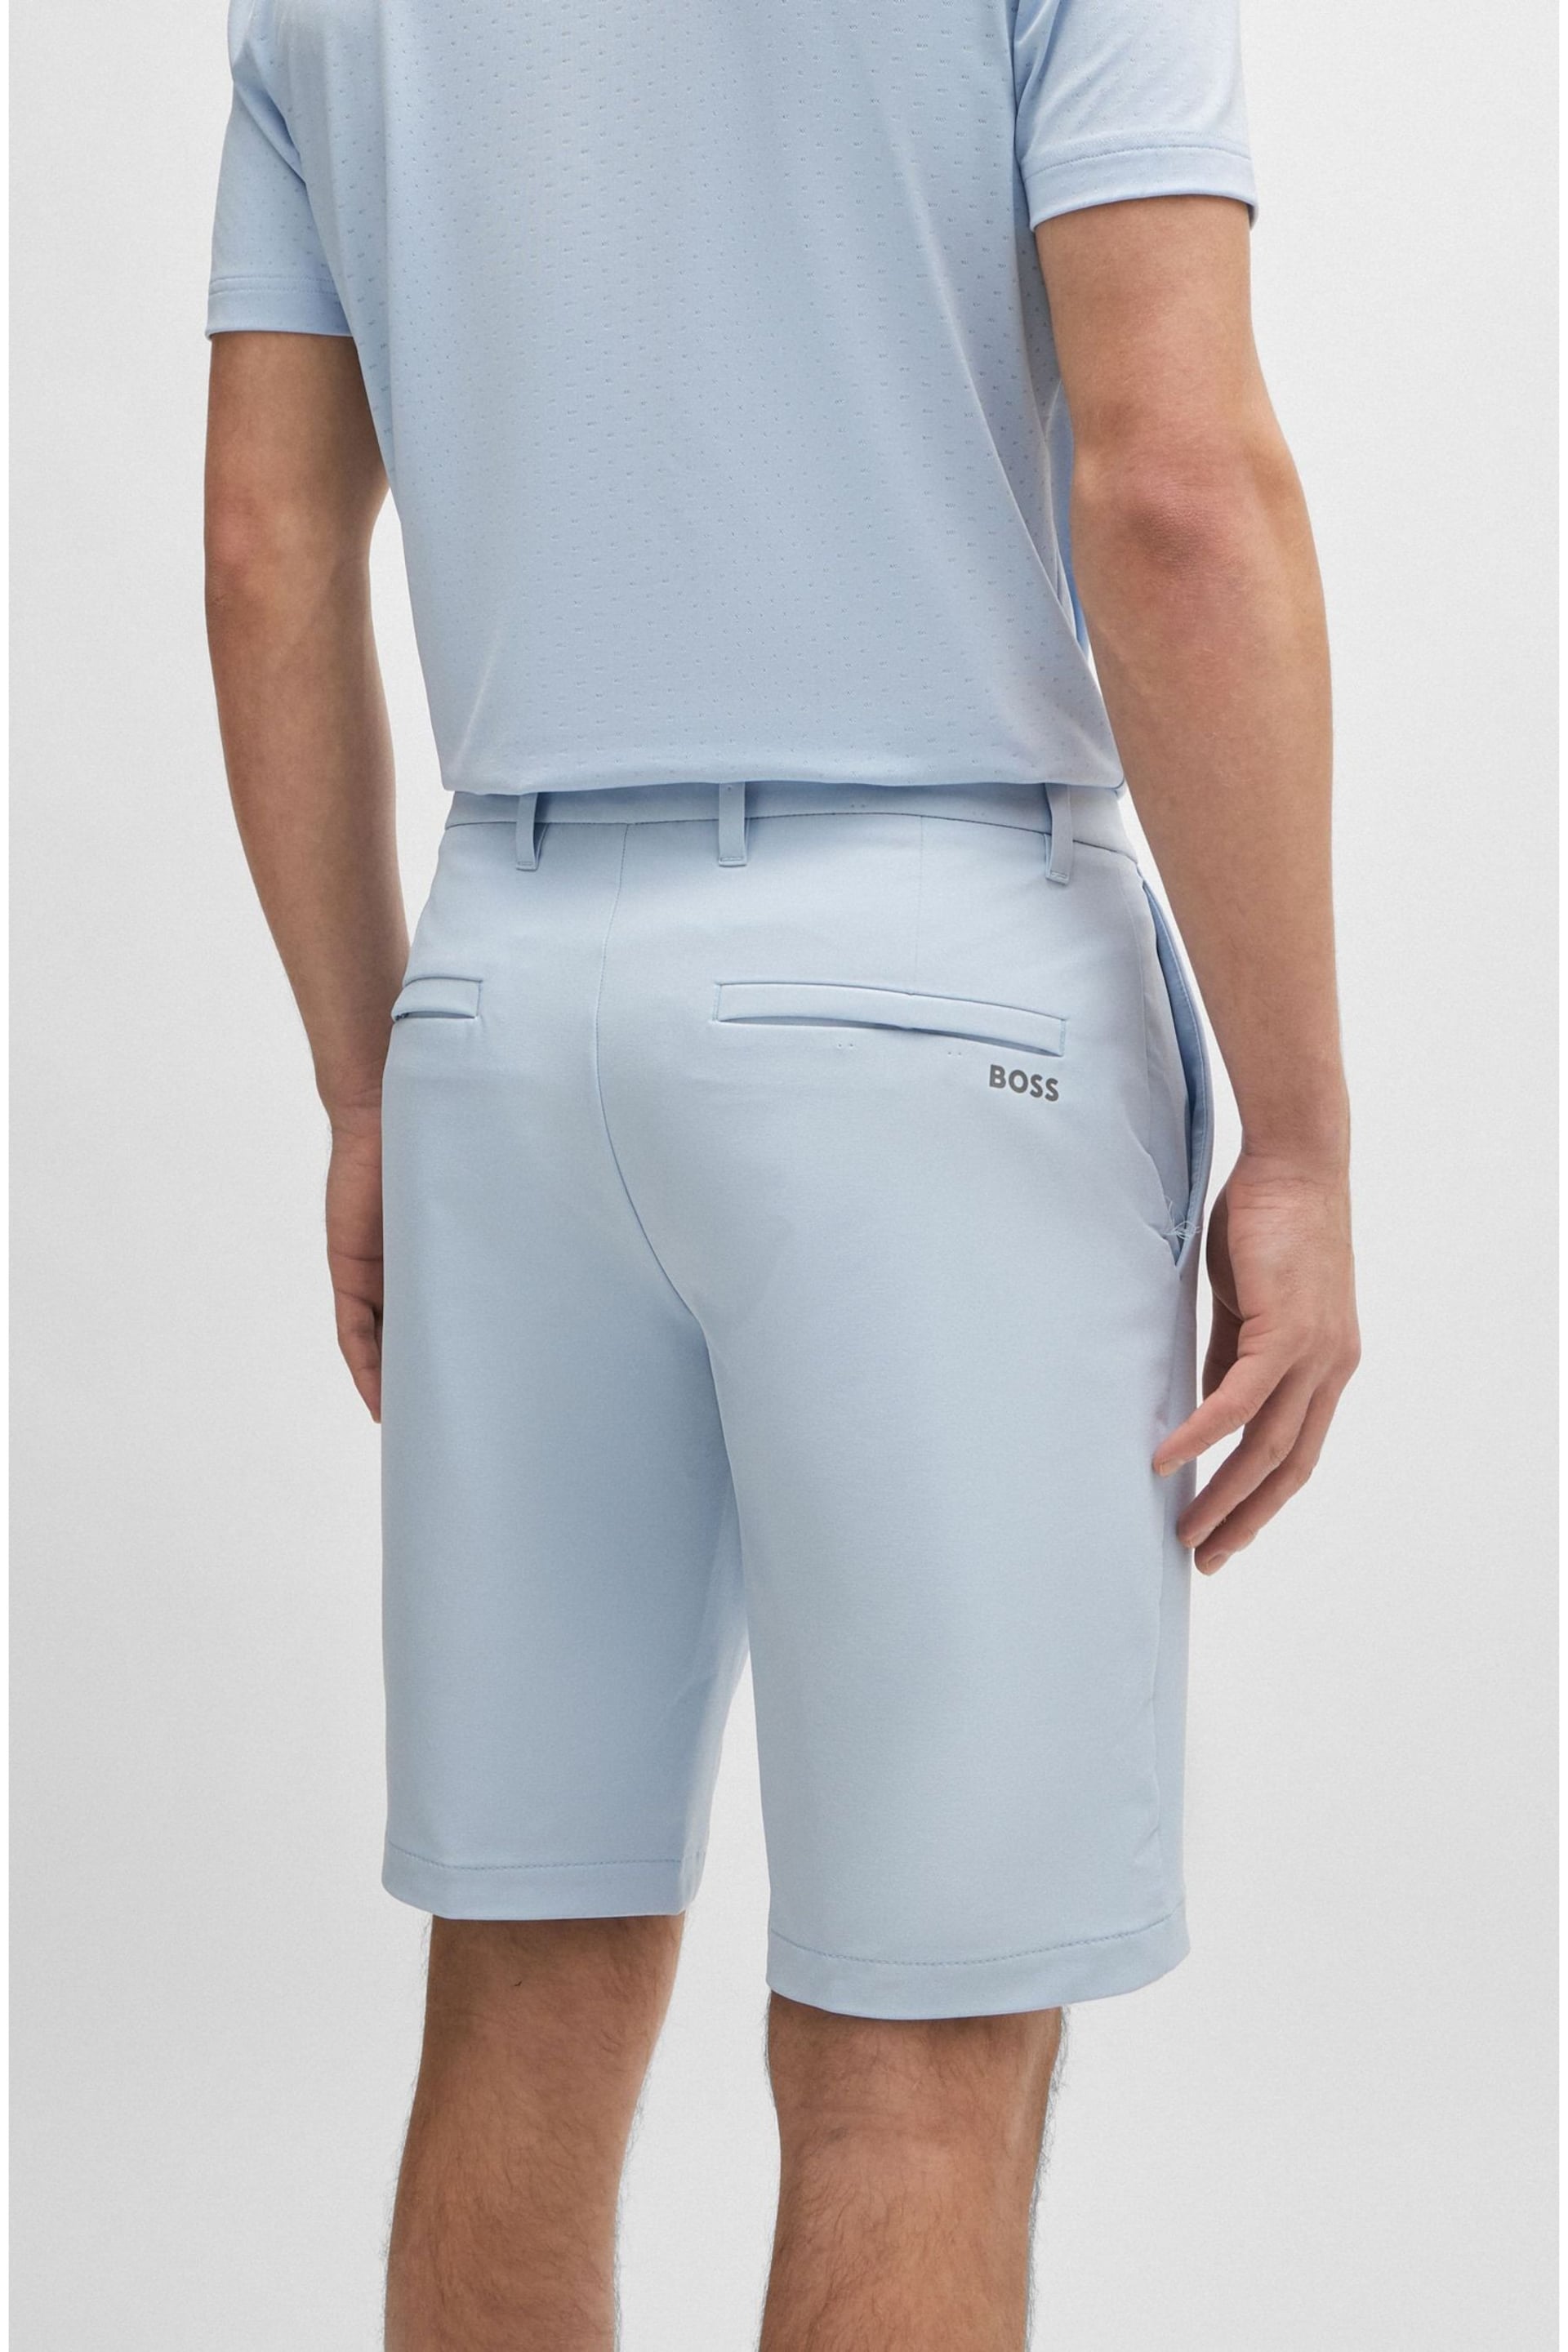 BOSS Light Blue Slim-Fit Shorts in Water-Repellent Easy-Iron Fabric - Image 4 of 5